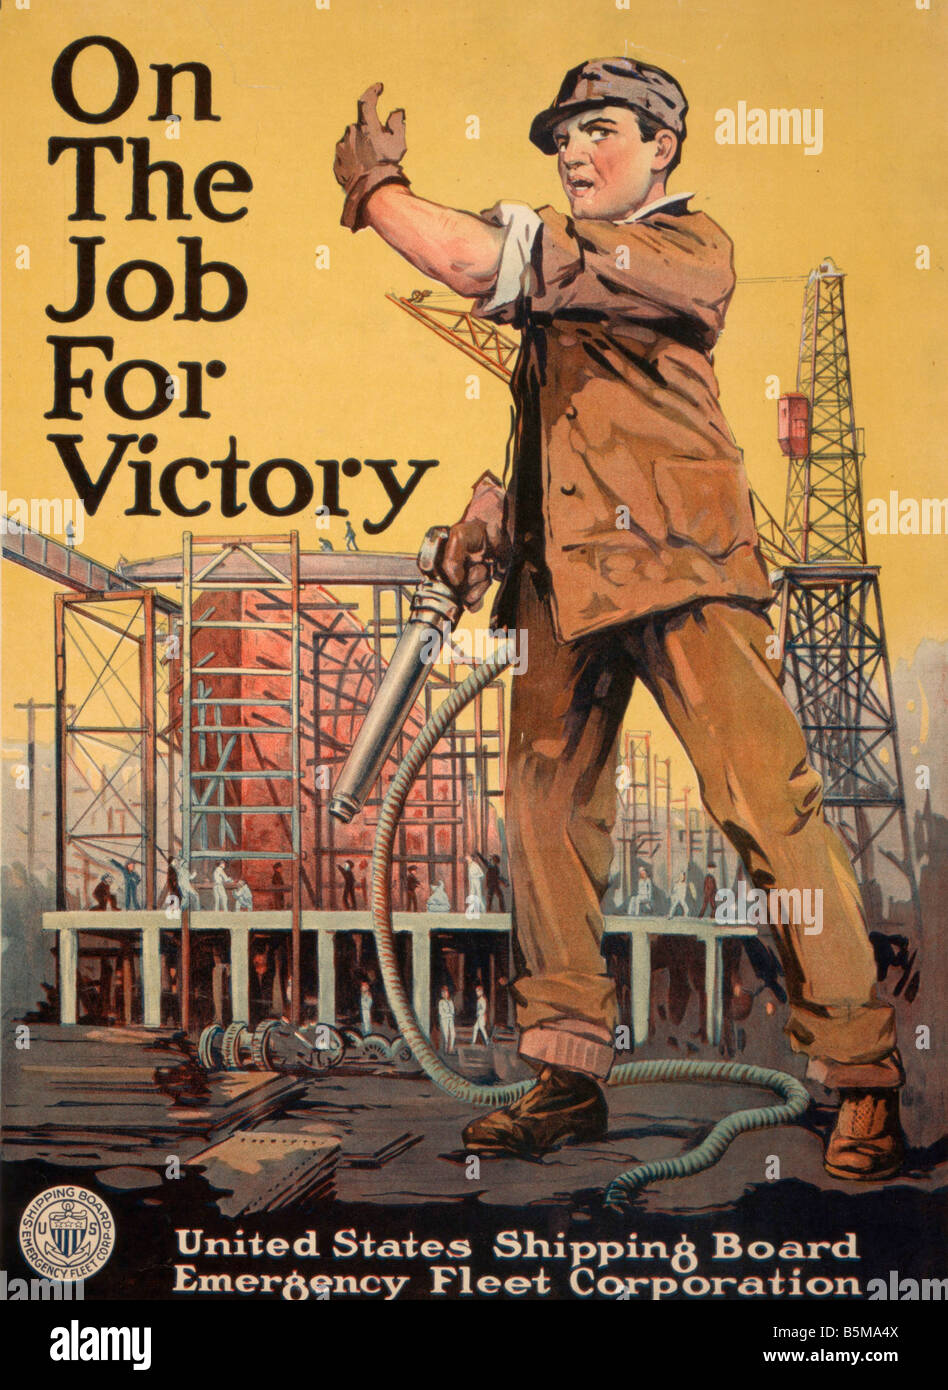 2 G55 P1 1917 55 WW I USA On the job for Victory Poster History World War I Propaganda On the job for victory propaganda by the Stock Photo